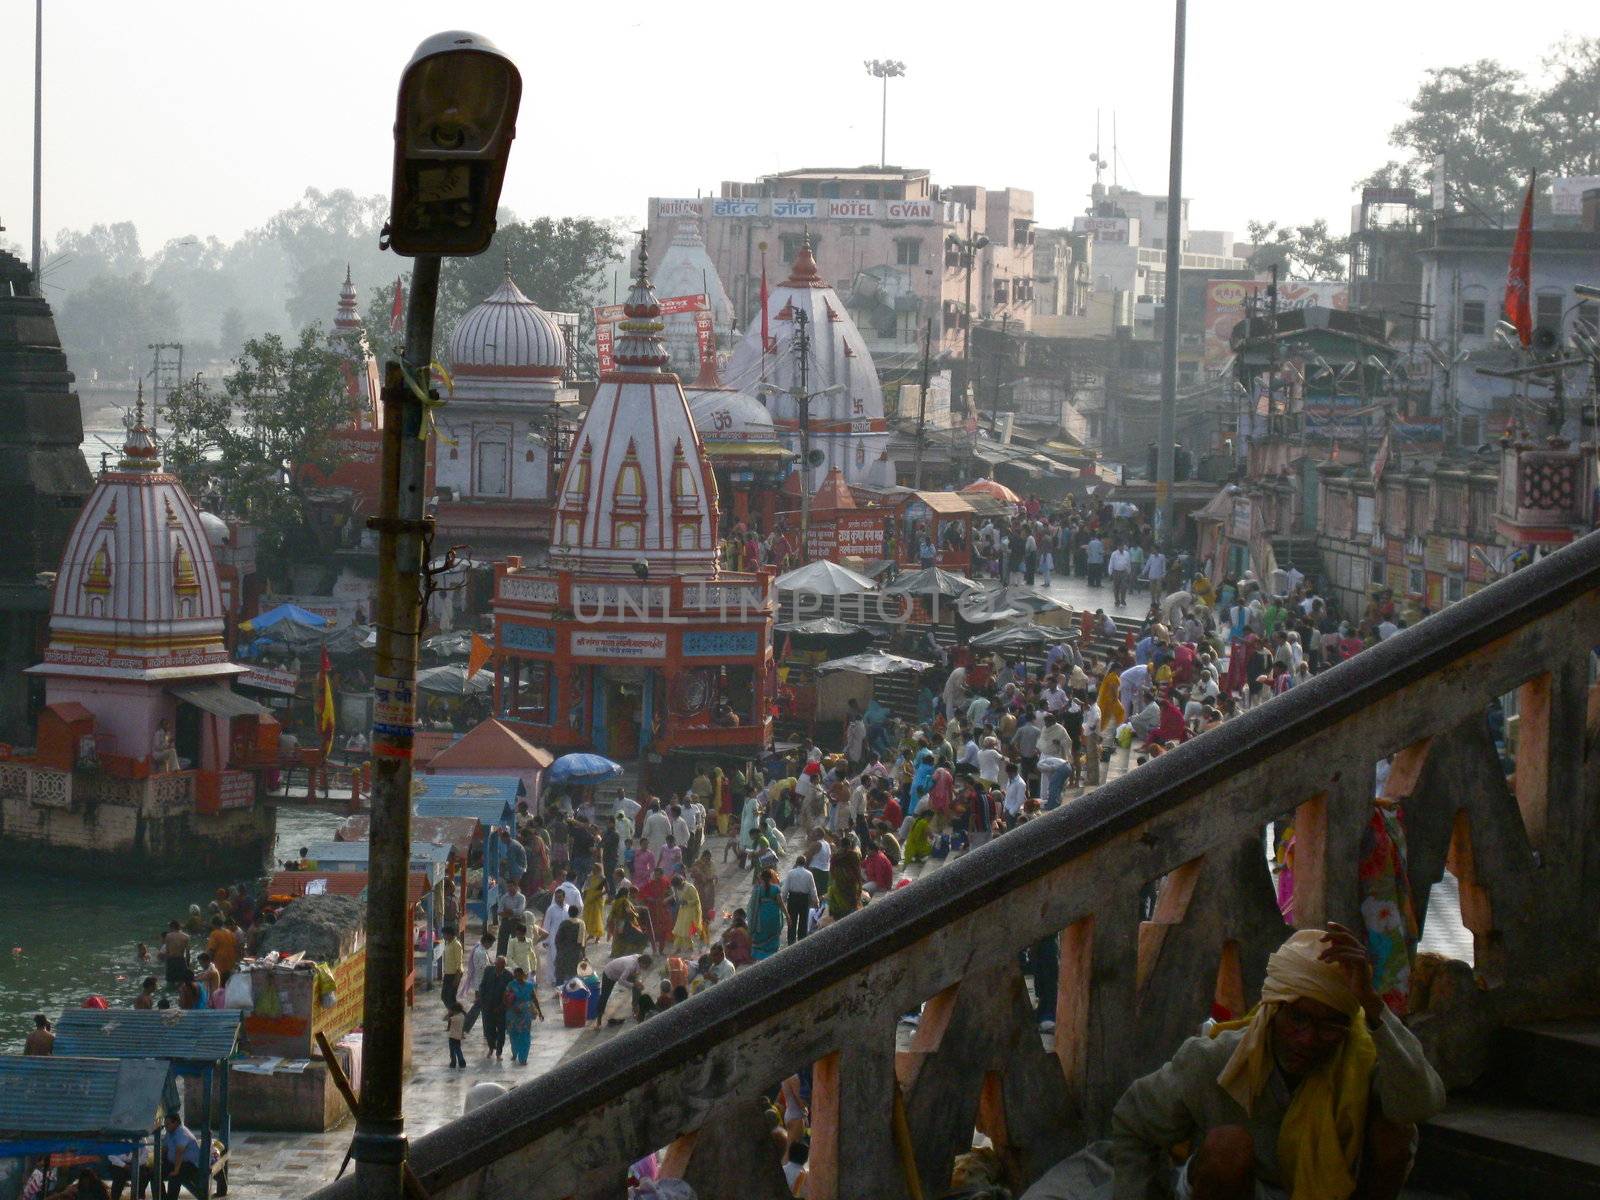 A view down on to the Temples of the Haridwar Ghats